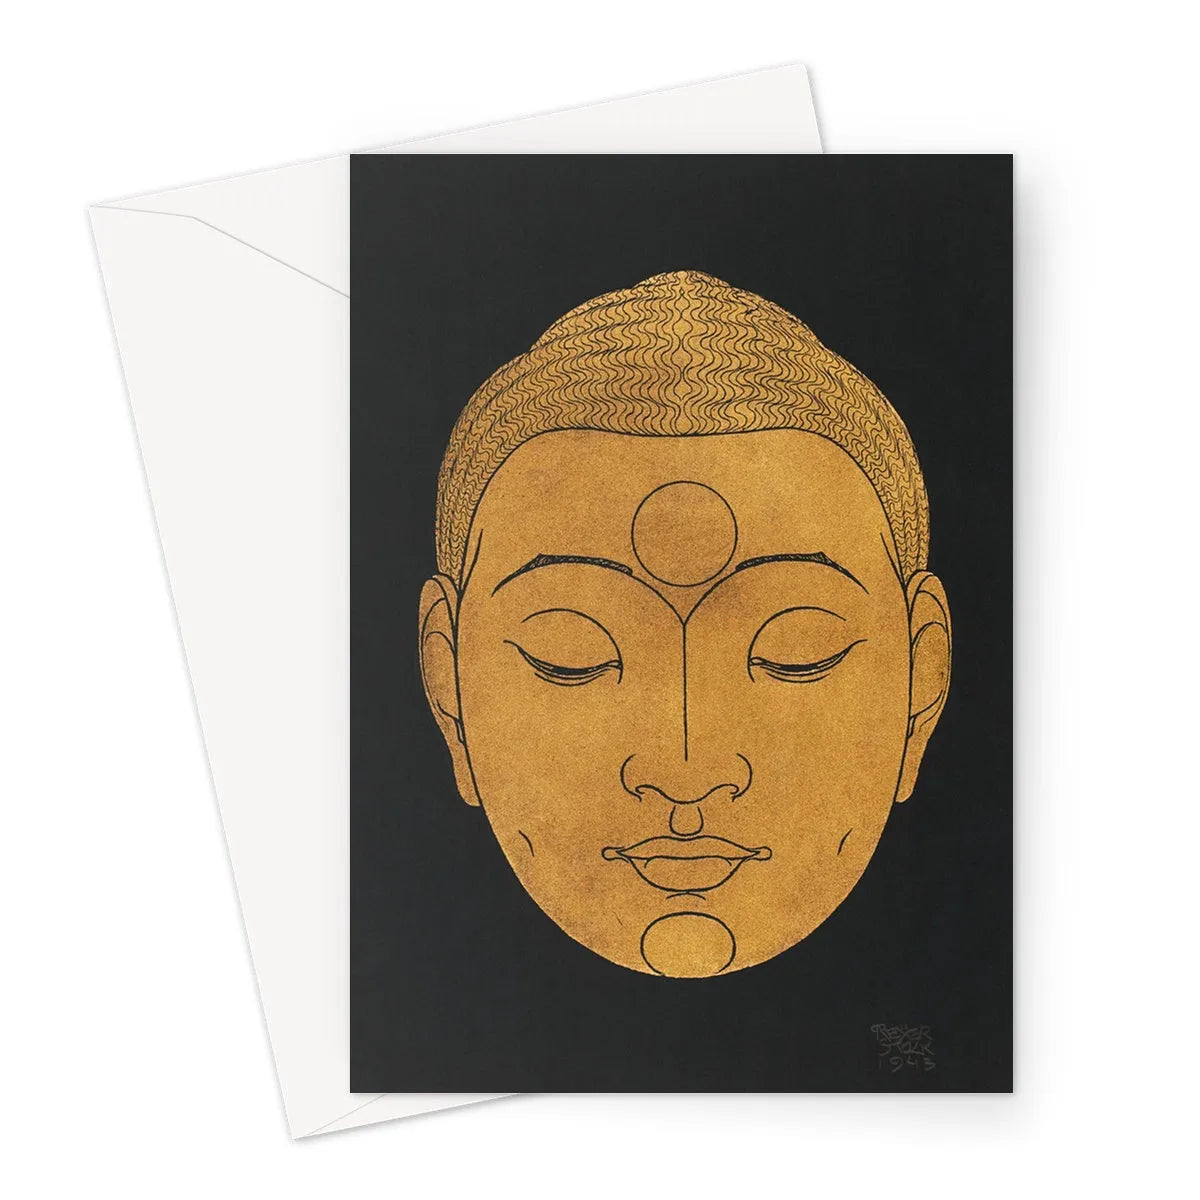 Head Of Buddha - Reijer Stolk Graphic Art Greeting Card - A5 Portrait / 1 Card - Greeting & Note Cards - Aesthetic Art